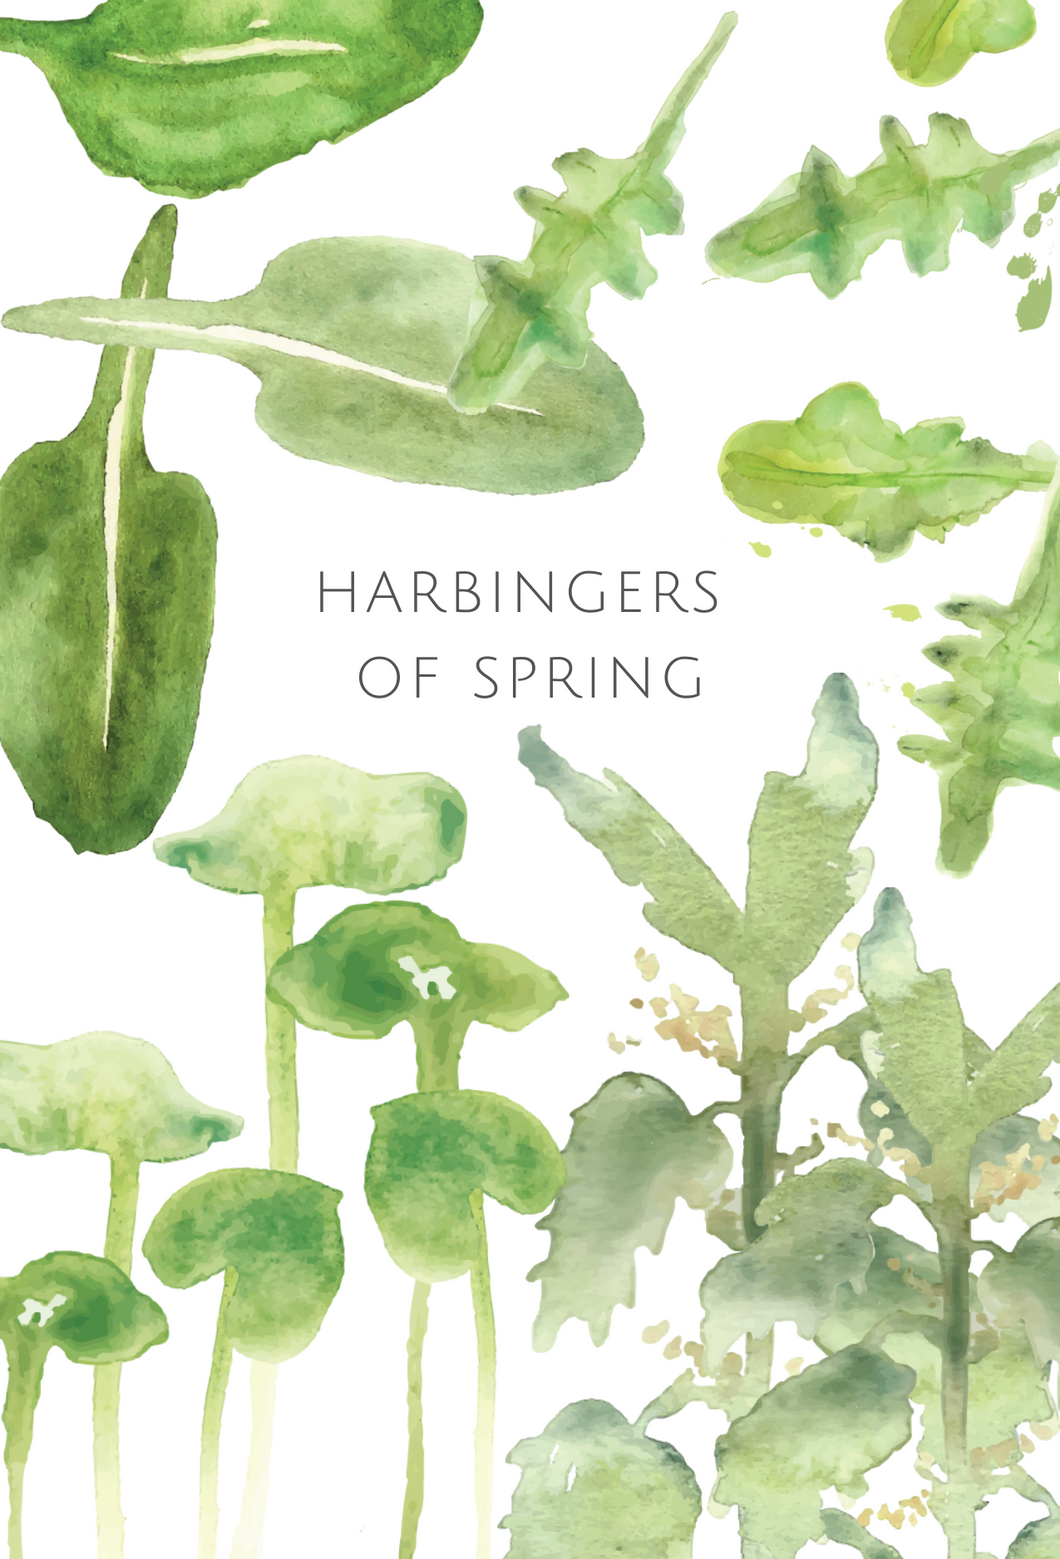 Harbingers of Spring greeting card